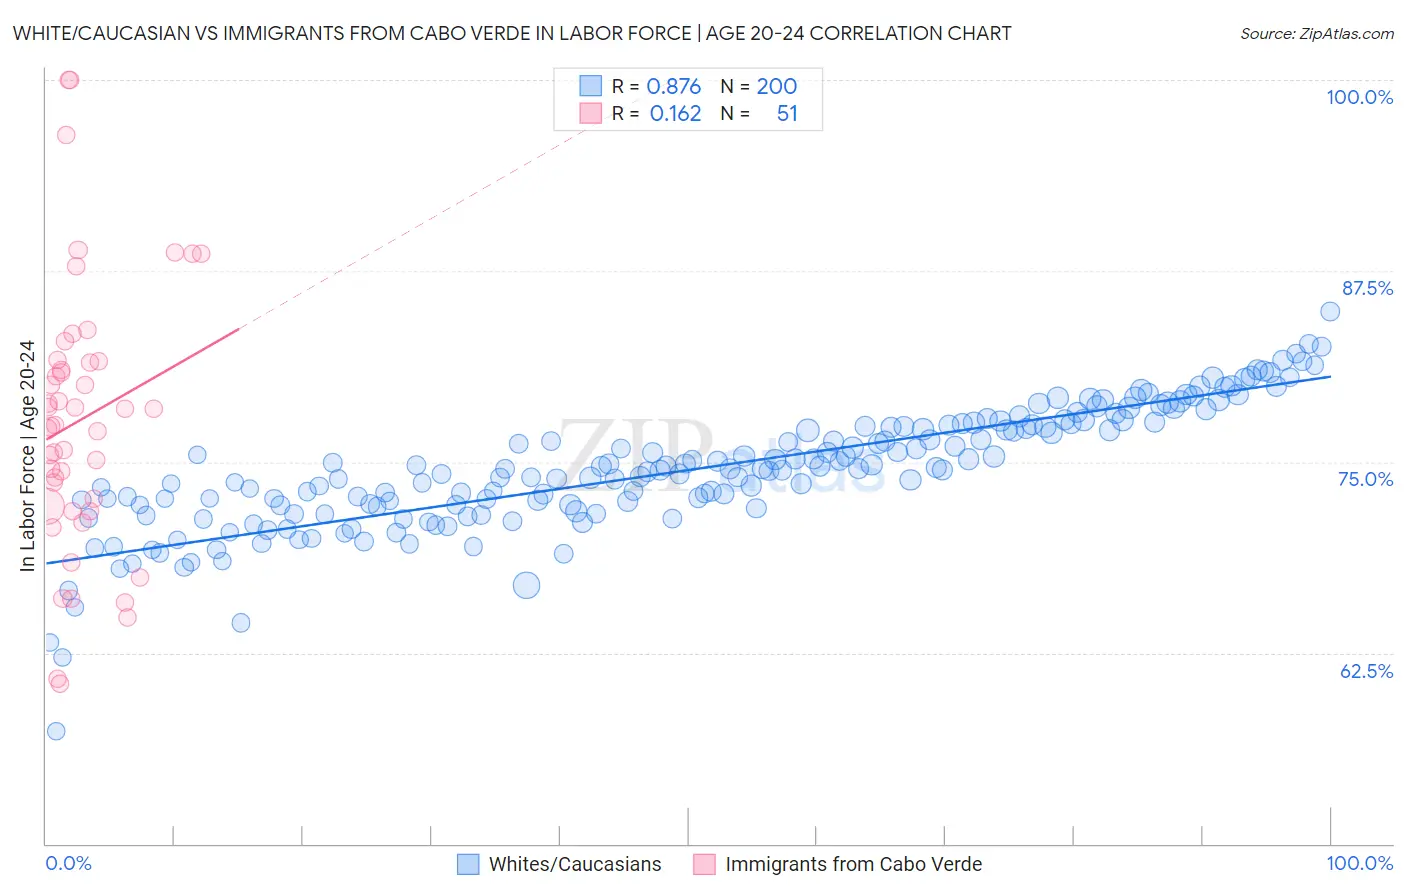 White/Caucasian vs Immigrants from Cabo Verde In Labor Force | Age 20-24